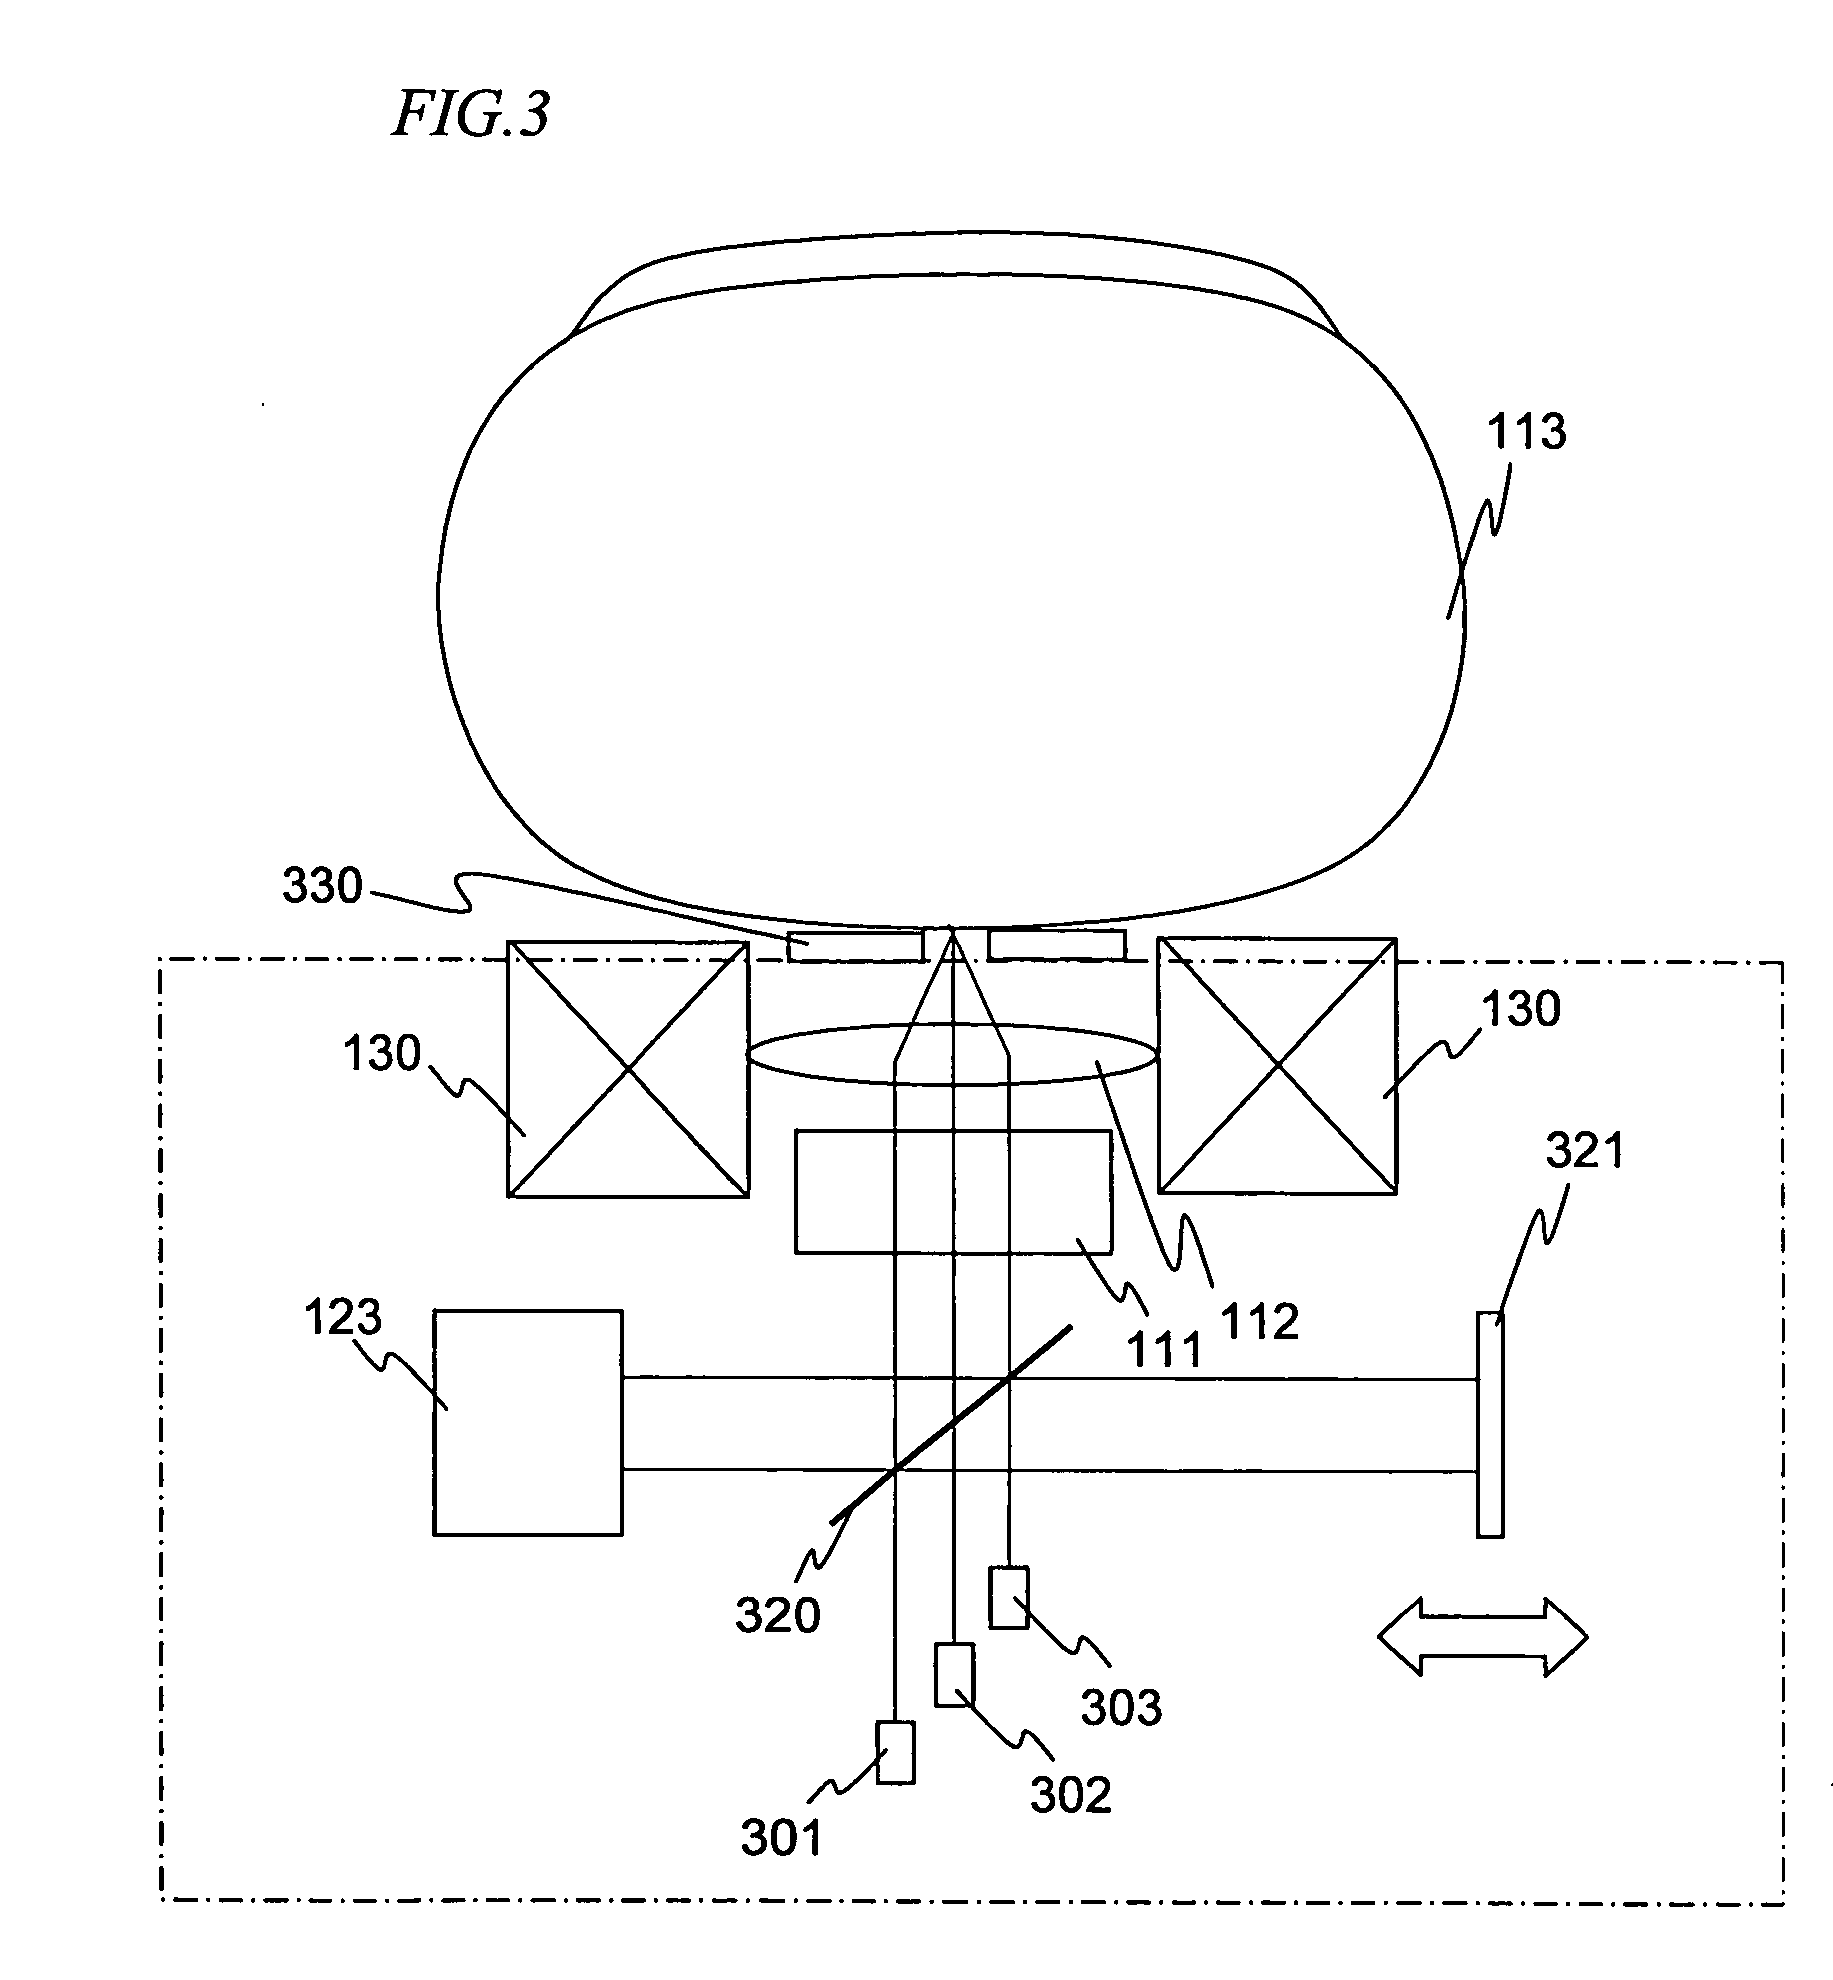 Optical measuring device for substances in vivo